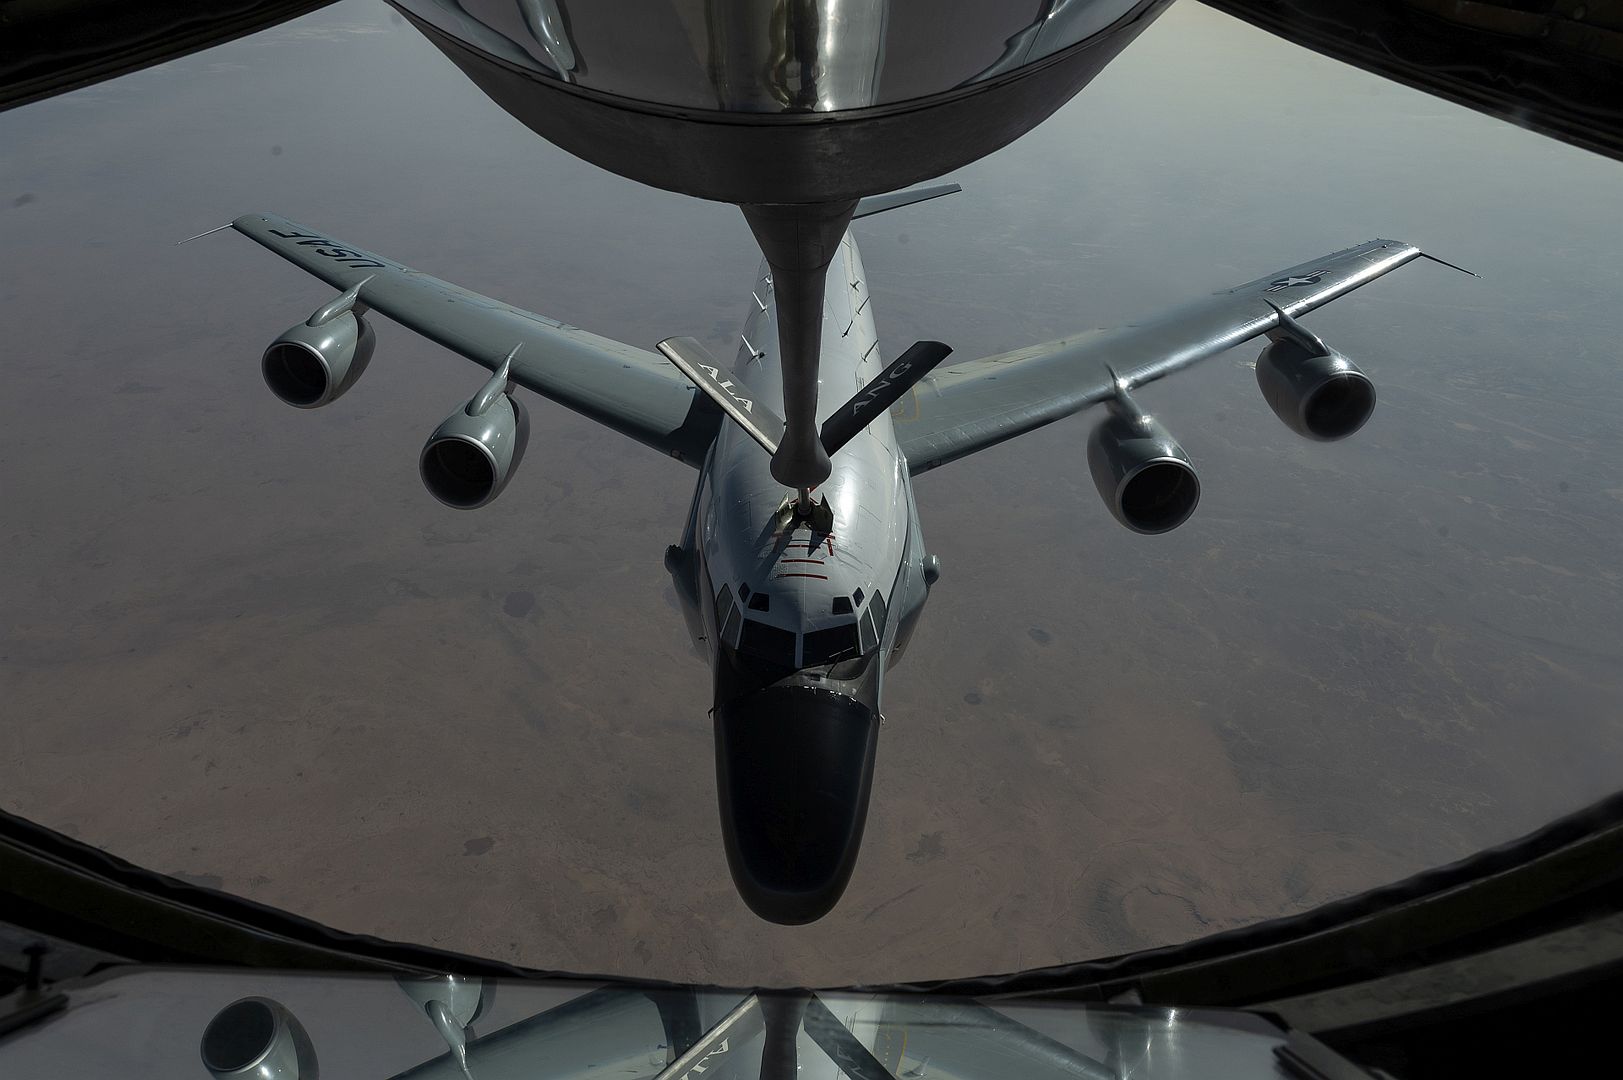 135 Stratotanker Assigned To The 91st Expeditionary Air Refueling Squadron